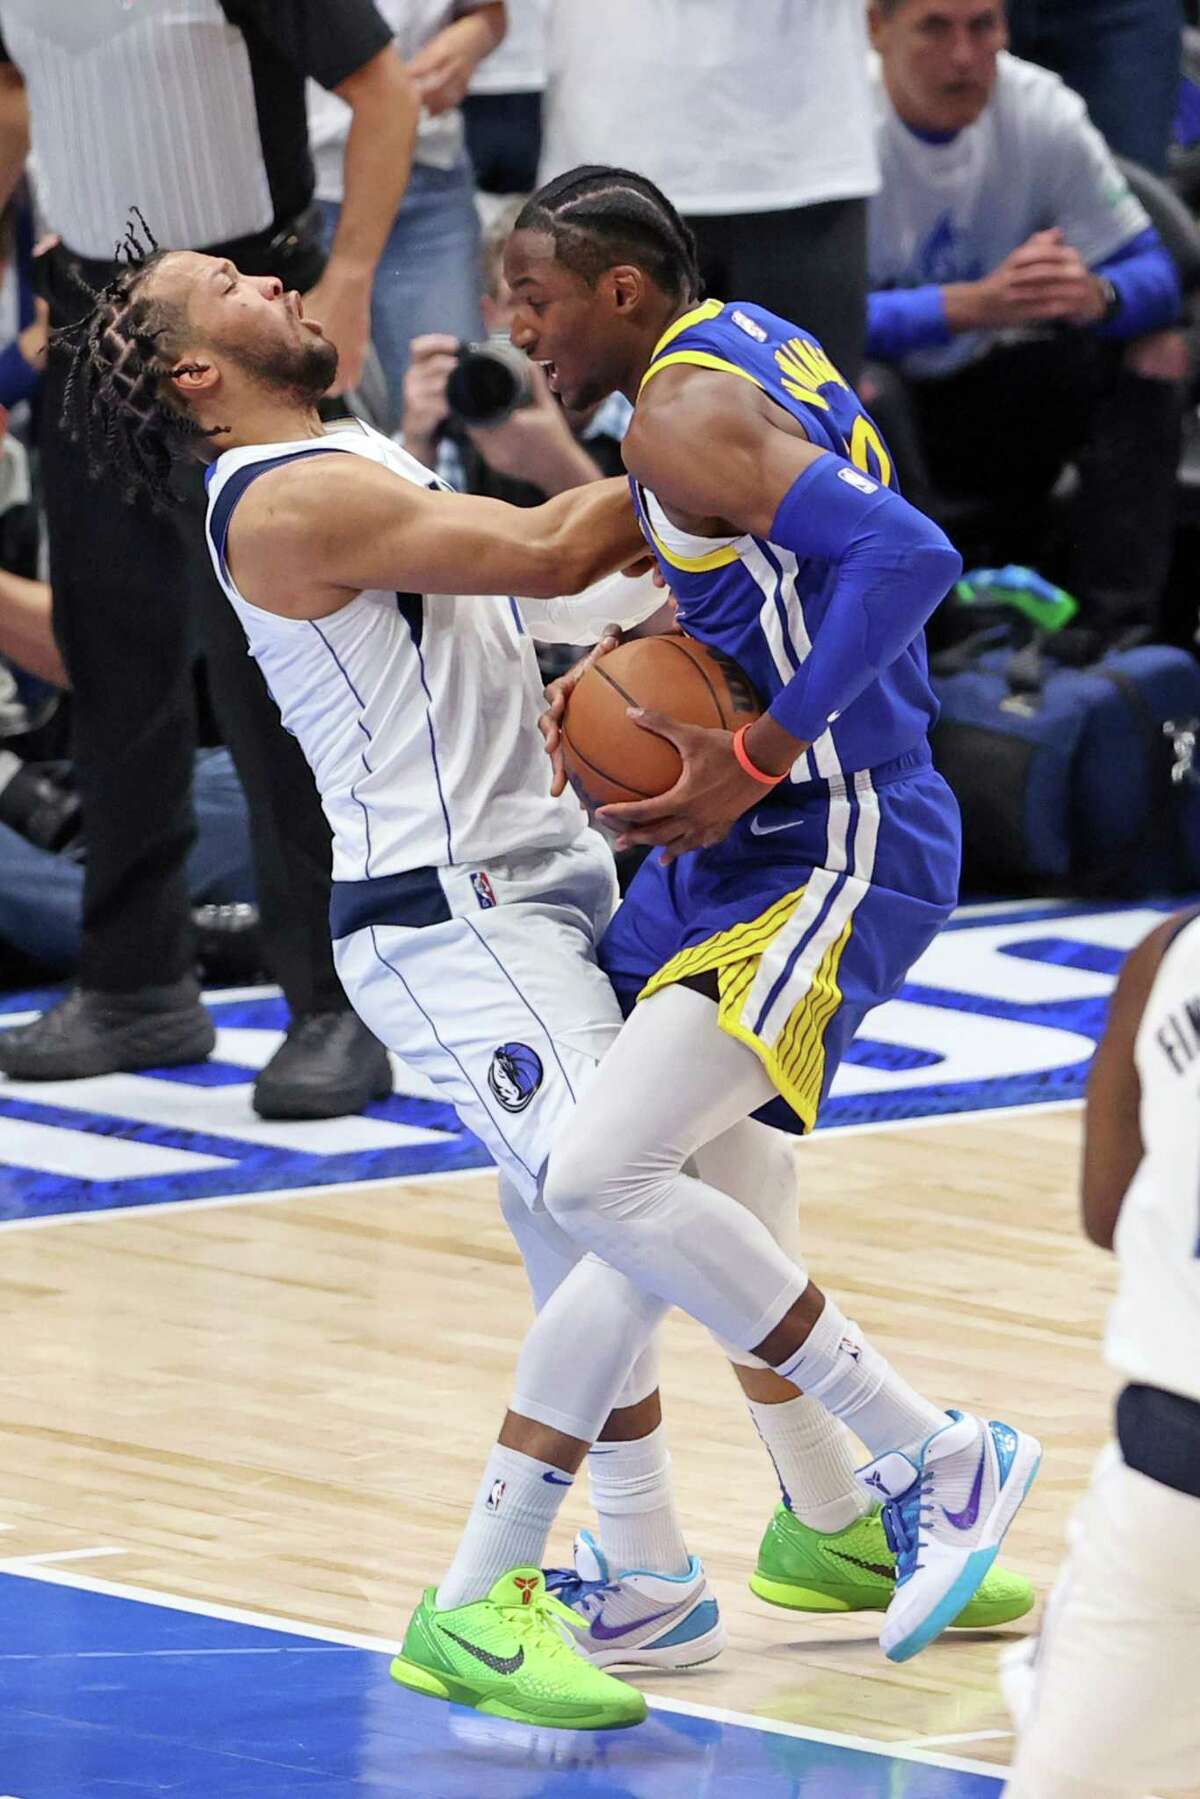 Golden State Warriors’ Jonathan Kuminga is called for an offensive foul as Dallas Mavericks’ Jalen Brunson defends in 4th quarter of Mavs’ 119-109 win in Game 4 of NBA Western Conference Finals at American Airlines Center in Dallas, Texas, on Tuesday, May 24, 2022.